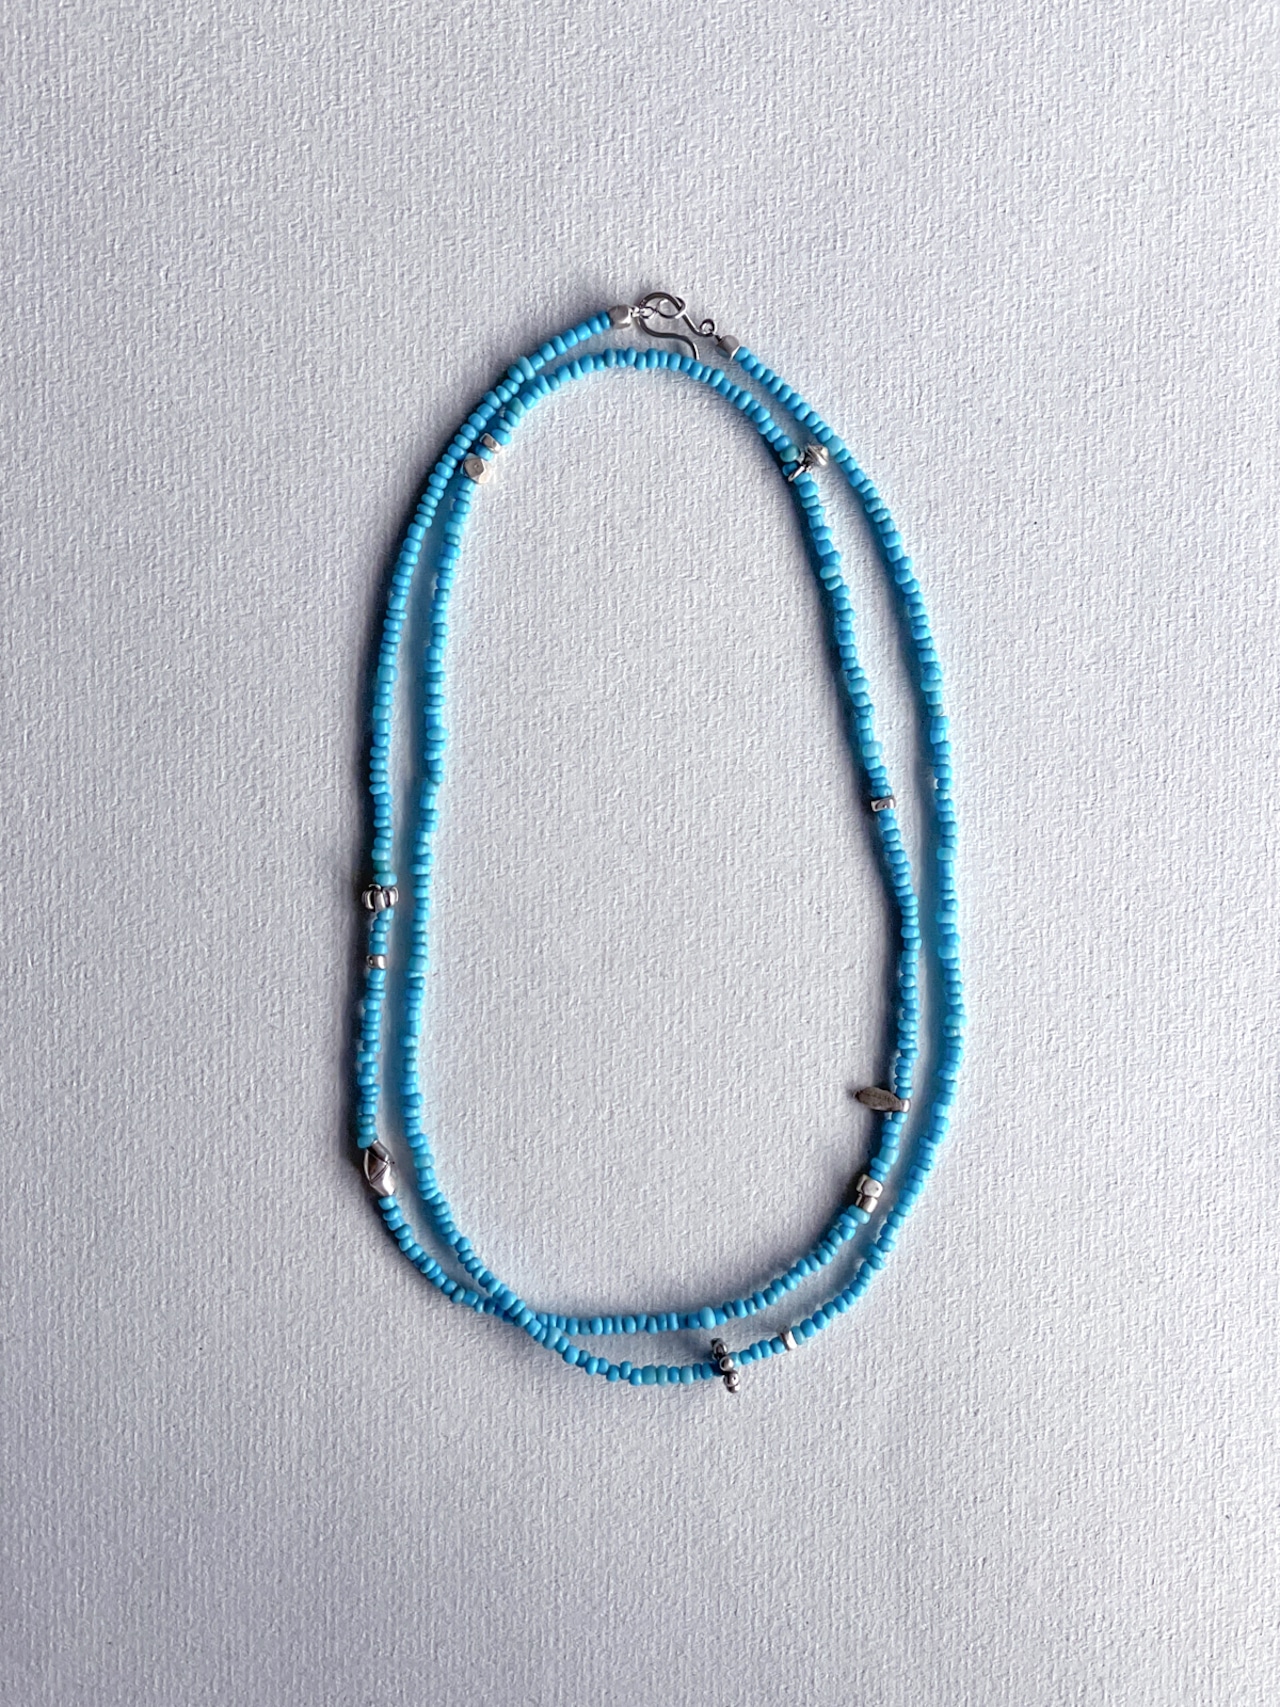 tay original／Beads long necklace（beads×silver）